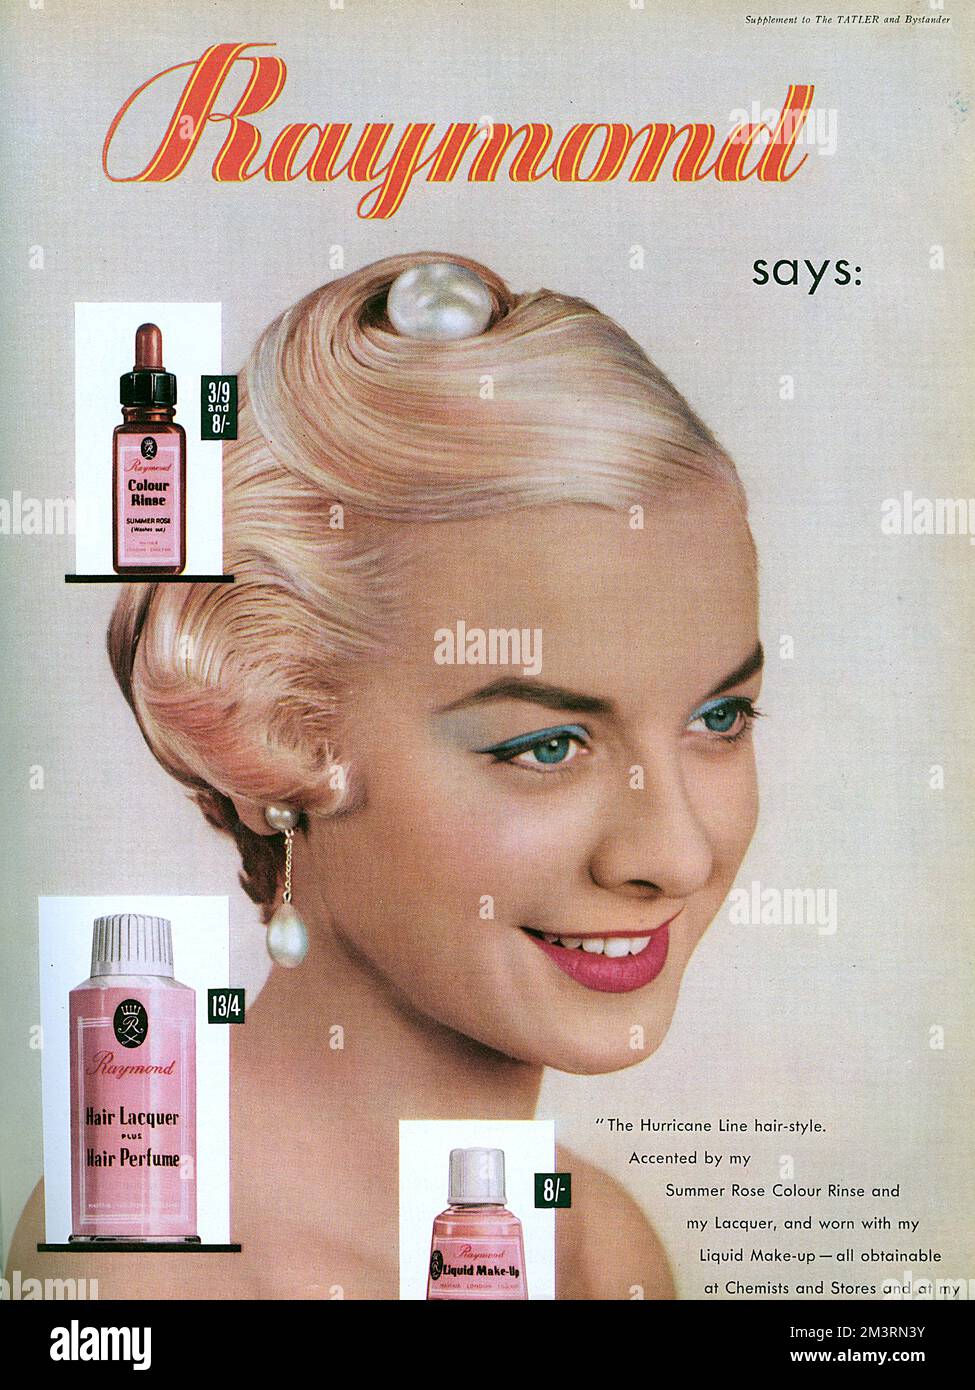 Advertisement for the Hurrican Line hair style, achieved with the help of products from Raymond - a summer rose colour rinse, hair lacquer and liquid make up.  Quite wild for 1958.     Date: 1958 Stock Photo